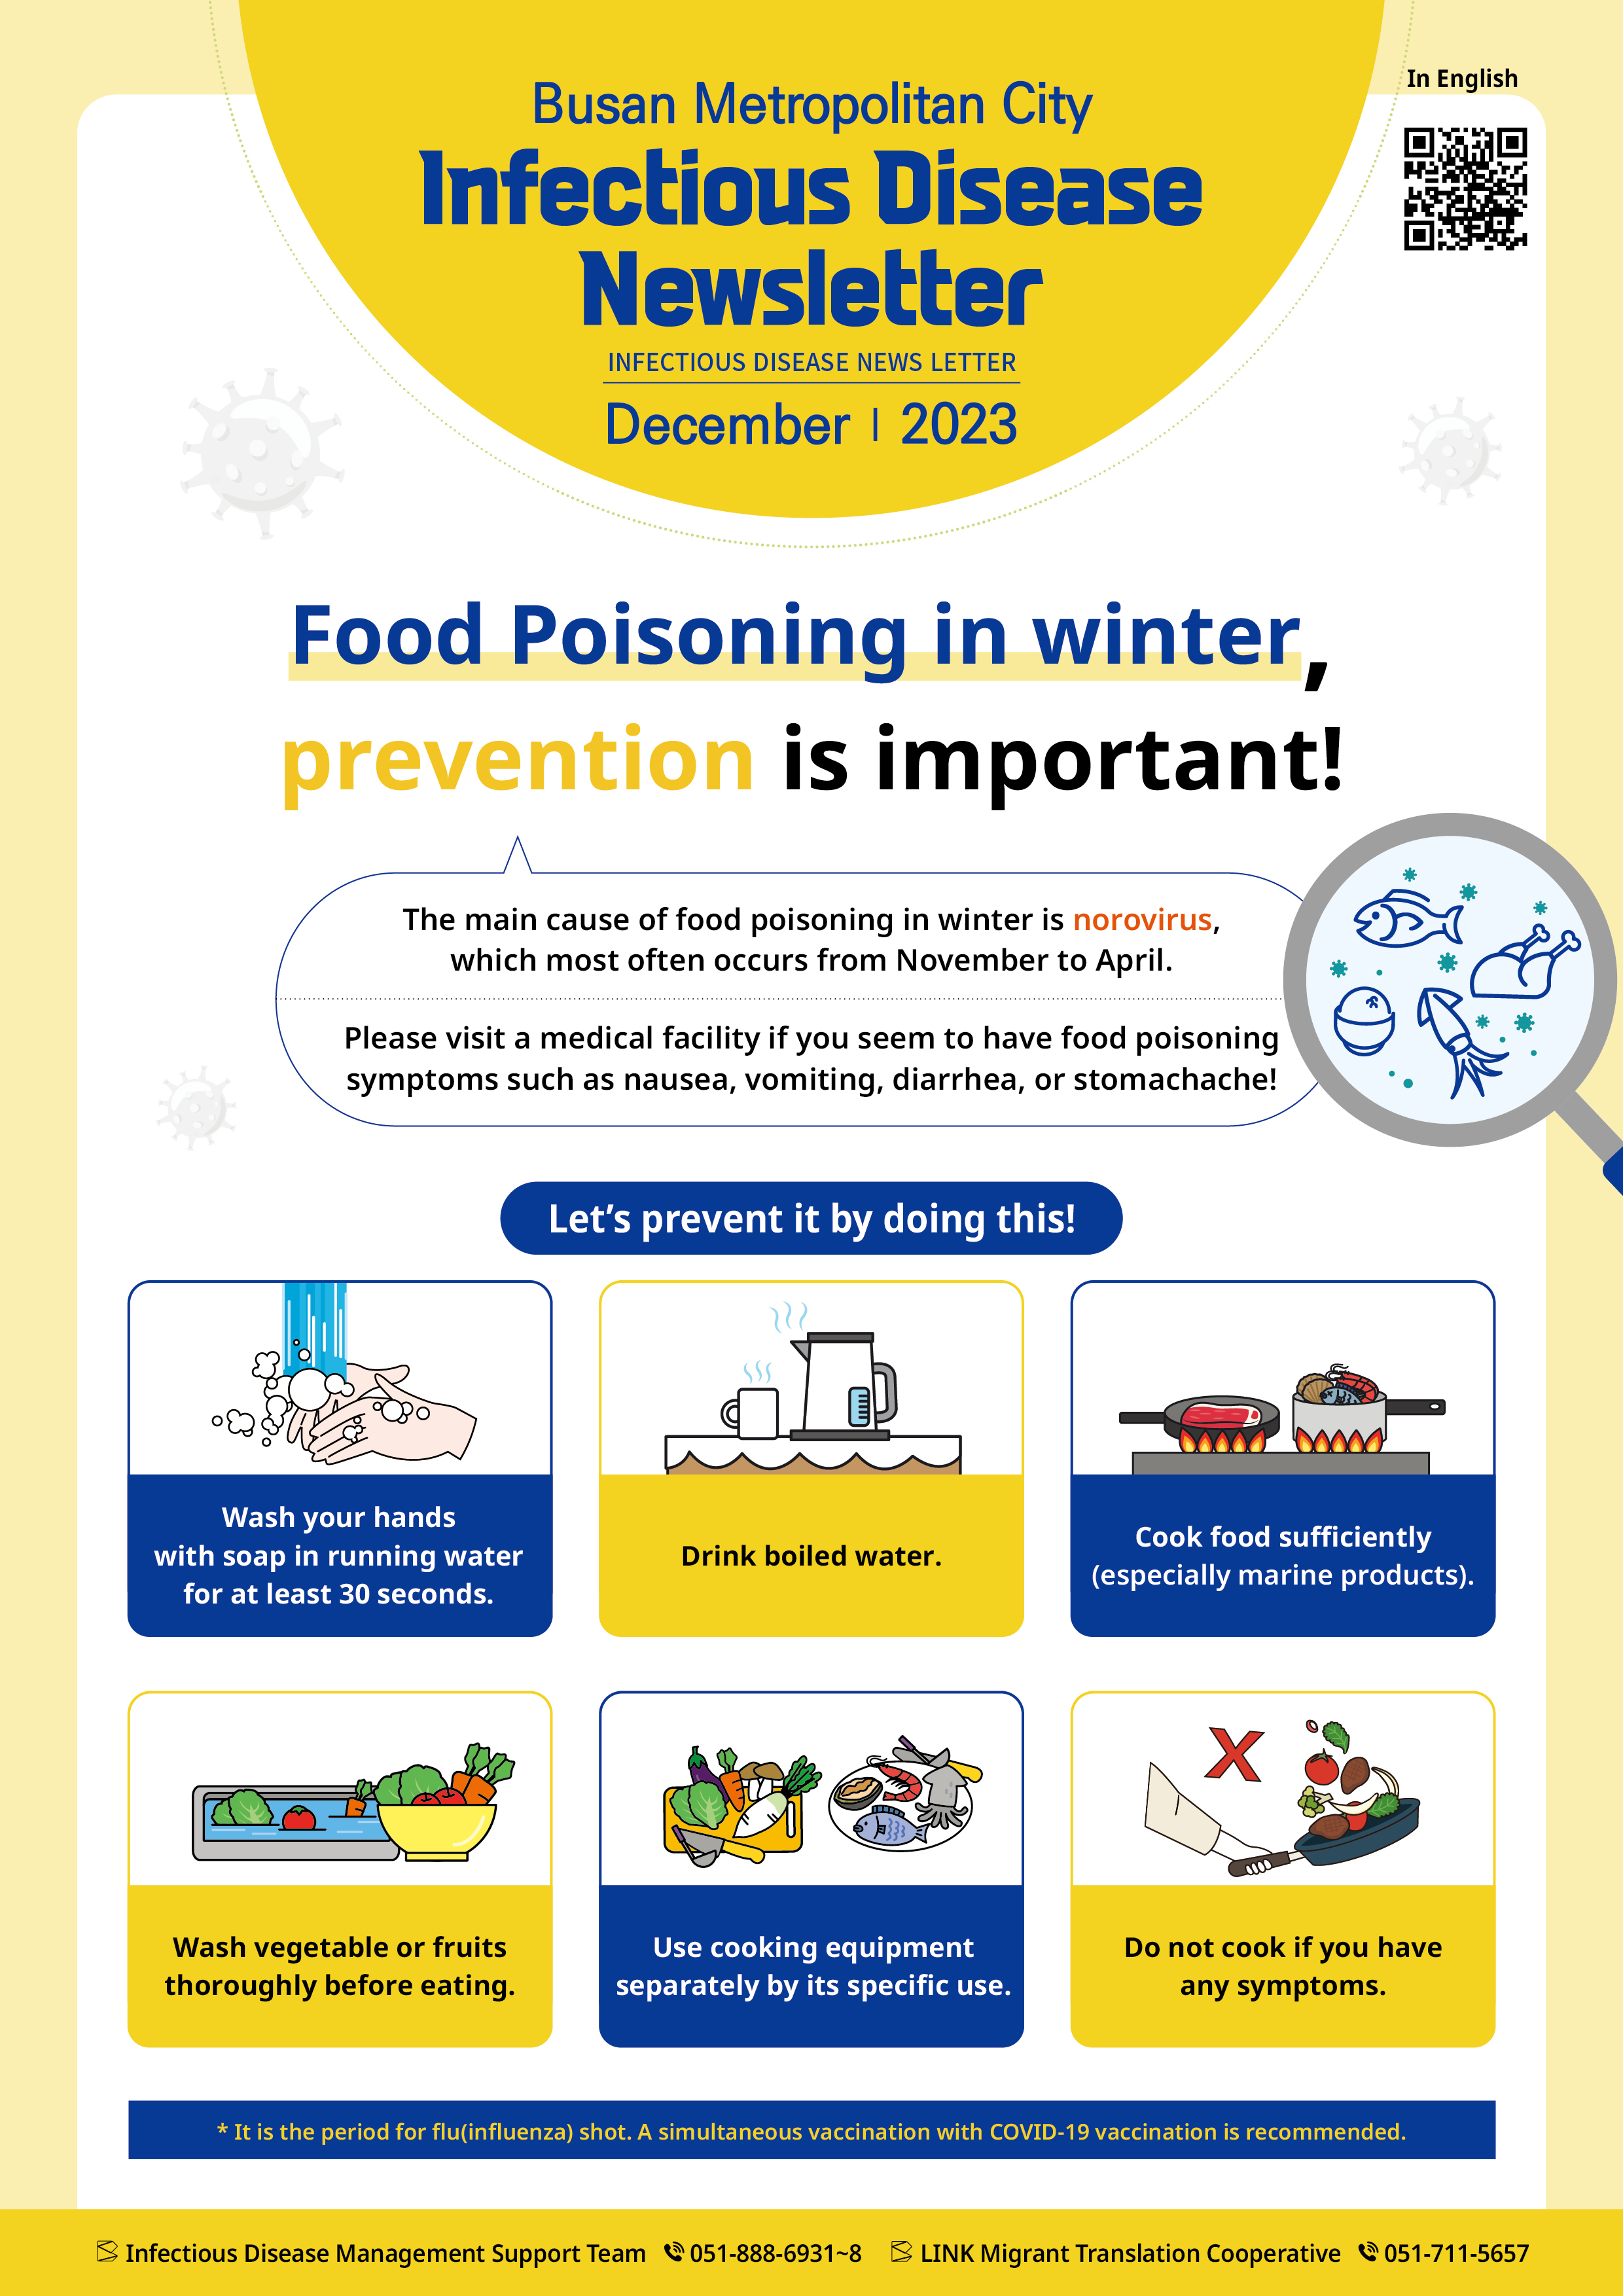 Infectious Disease Newsletter (Dec. 2023) in English